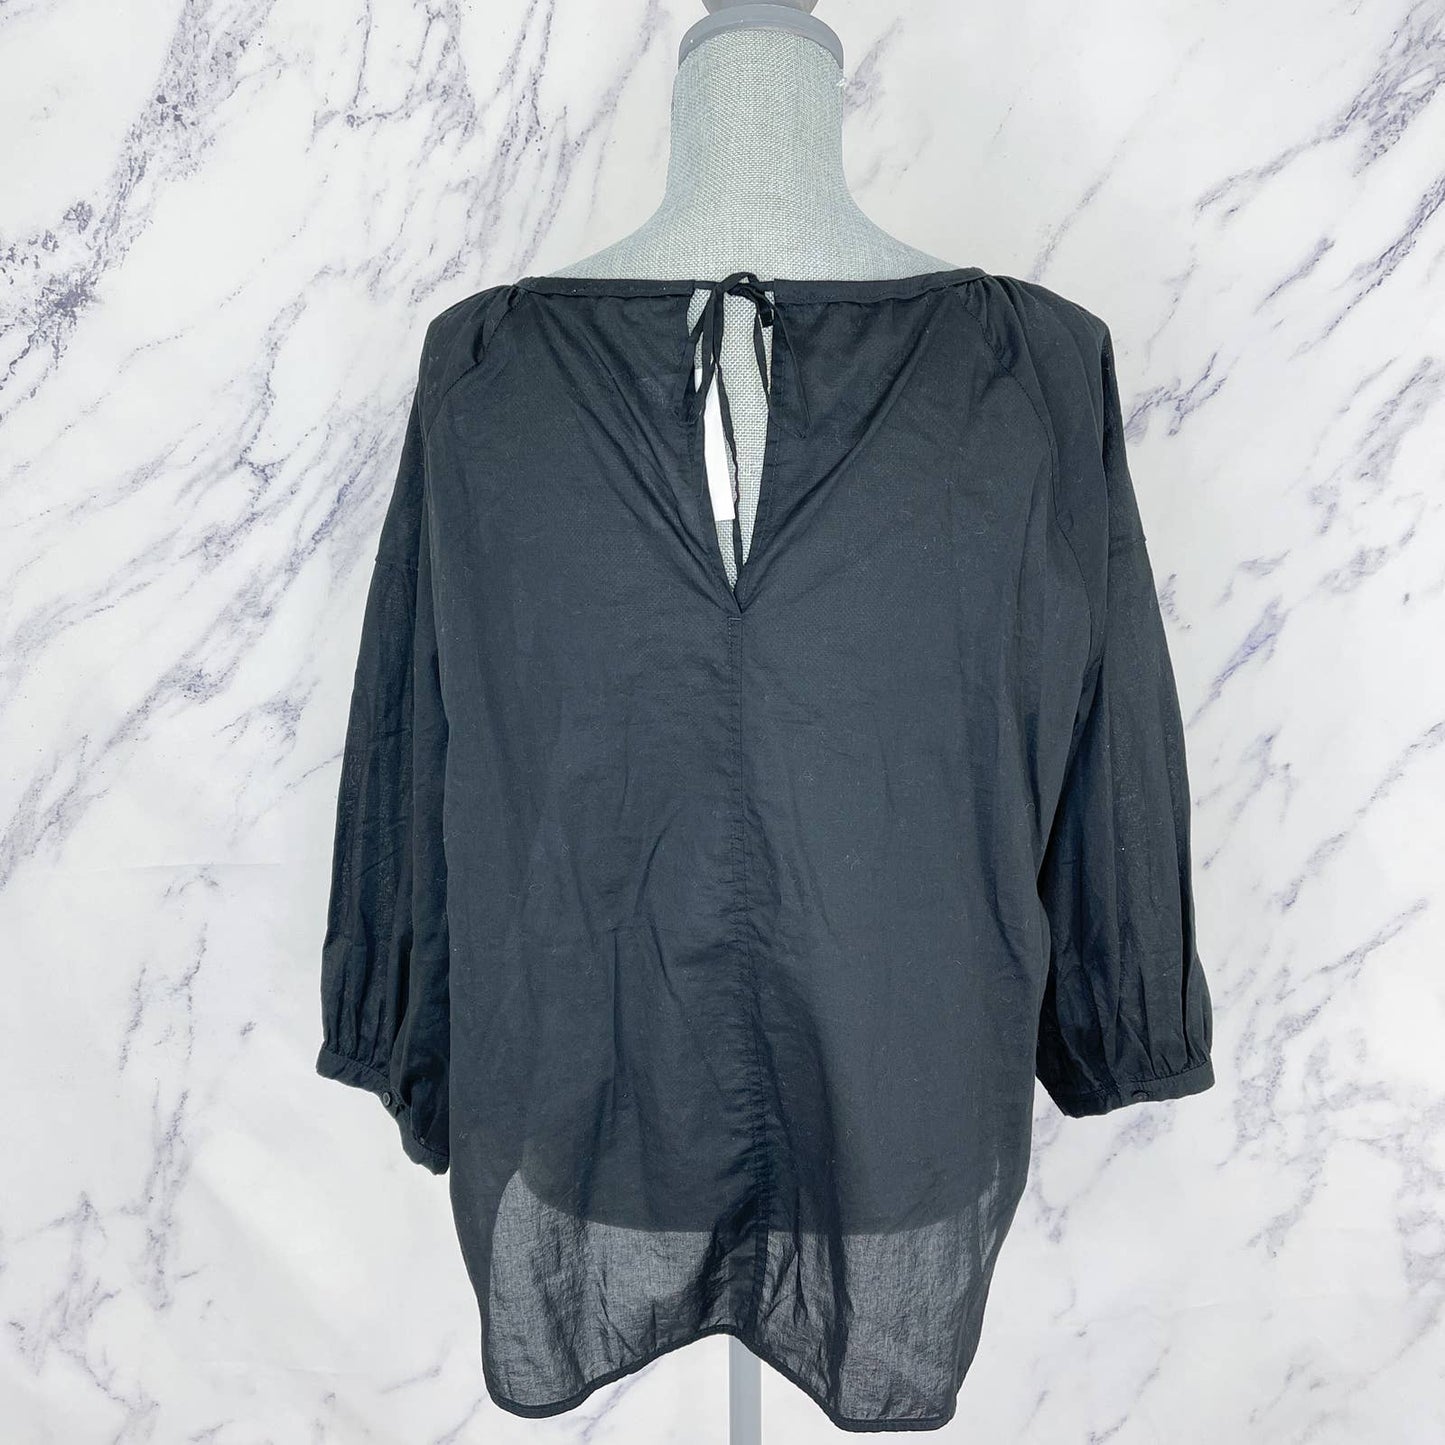 Everlane | Ruched Air Peasant Blouse | Sz 4 (S)